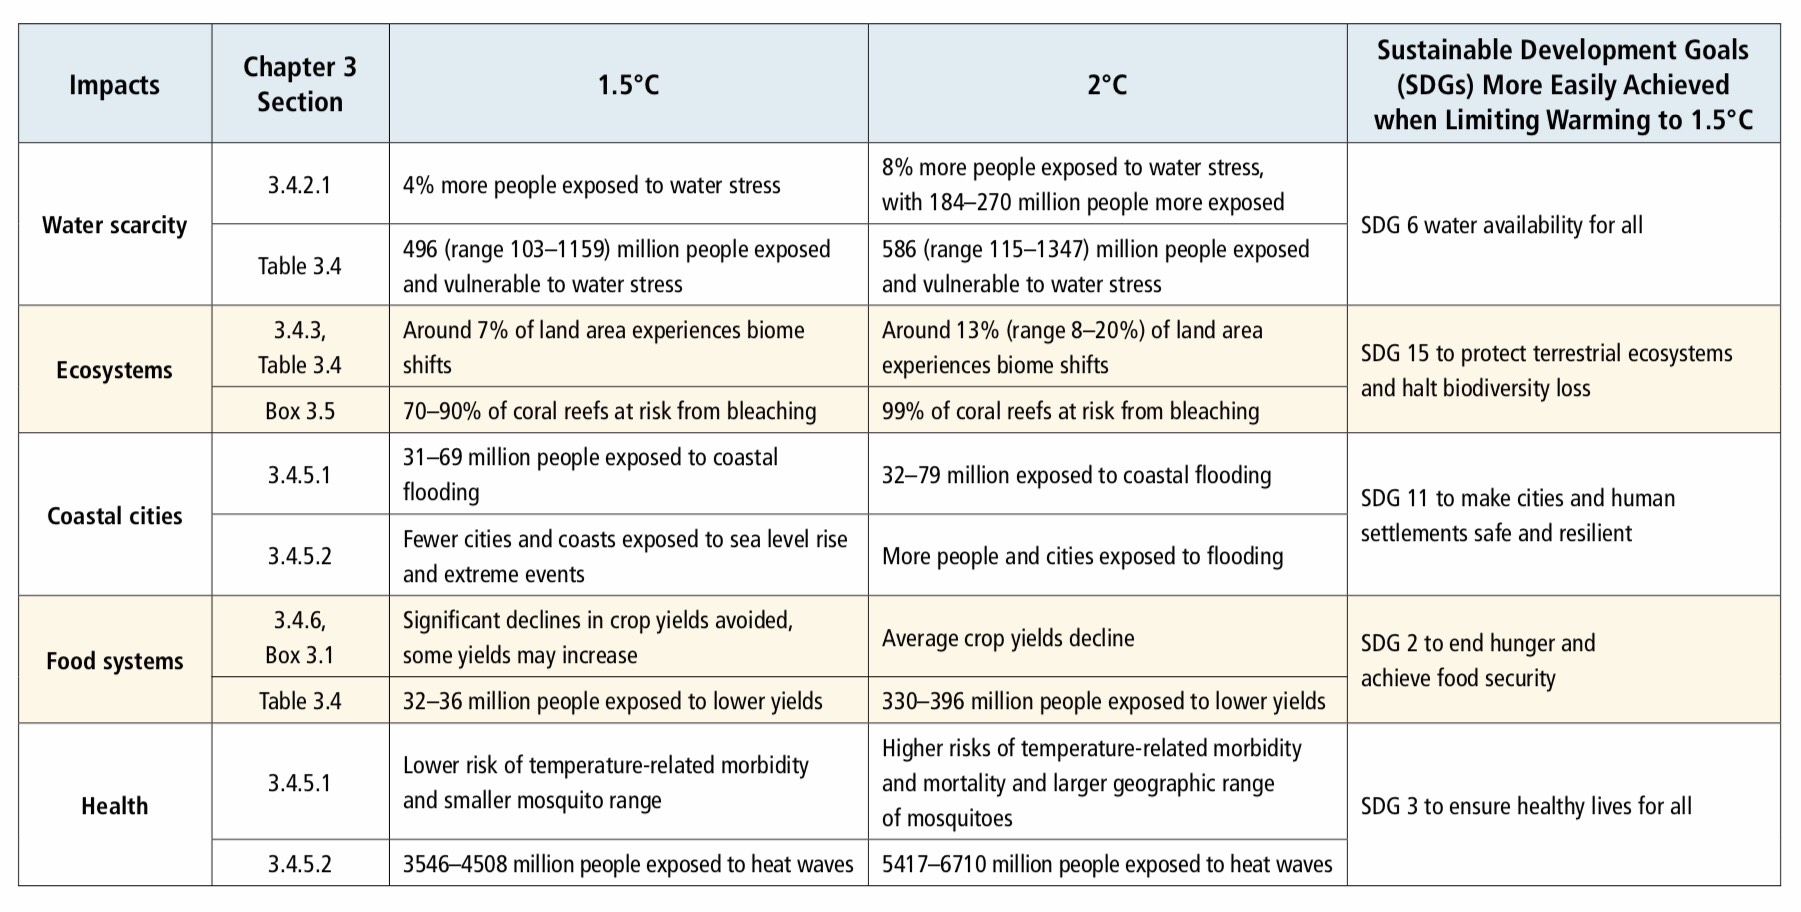 Figure from IPCC Special Report on Global Warming of 1.5°C